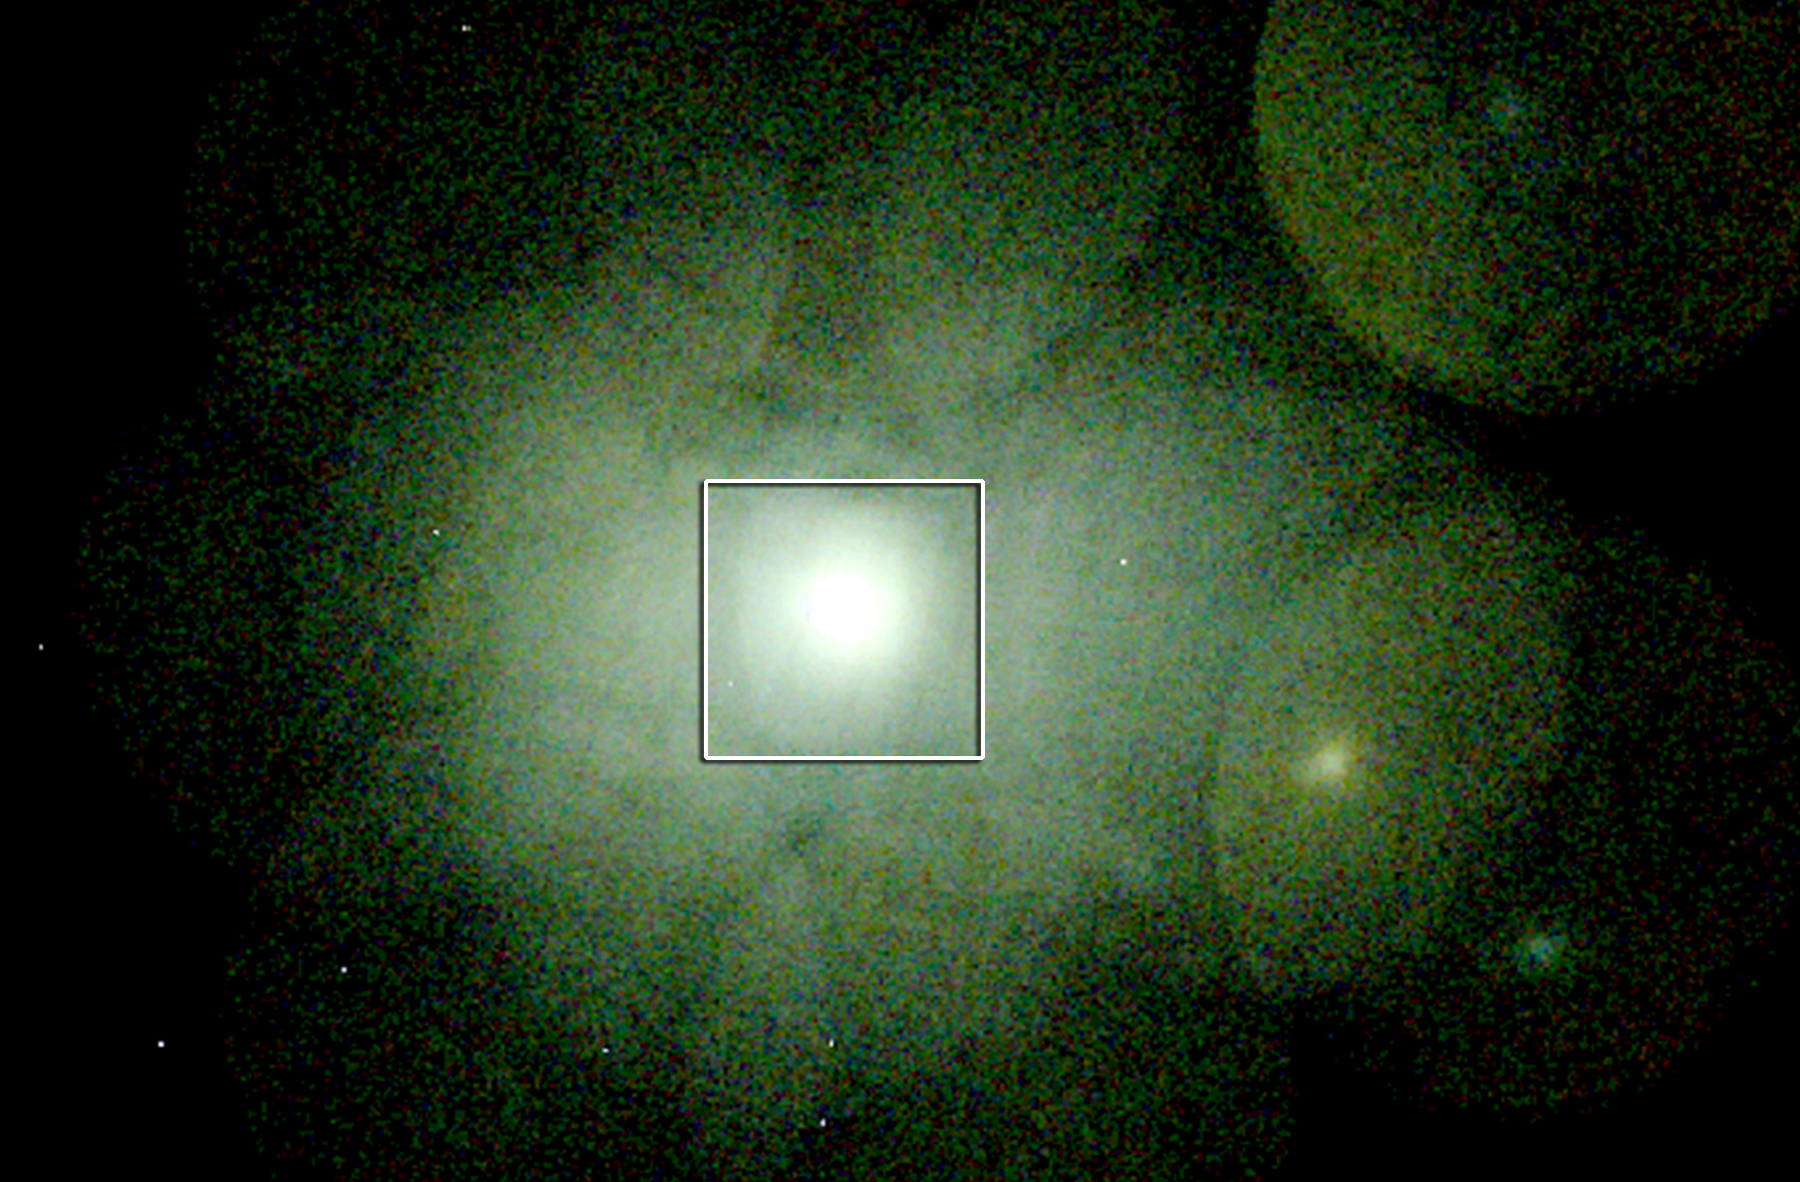 Image of 100-million-degree Fahrenheit gas that fills the Perseus cluster